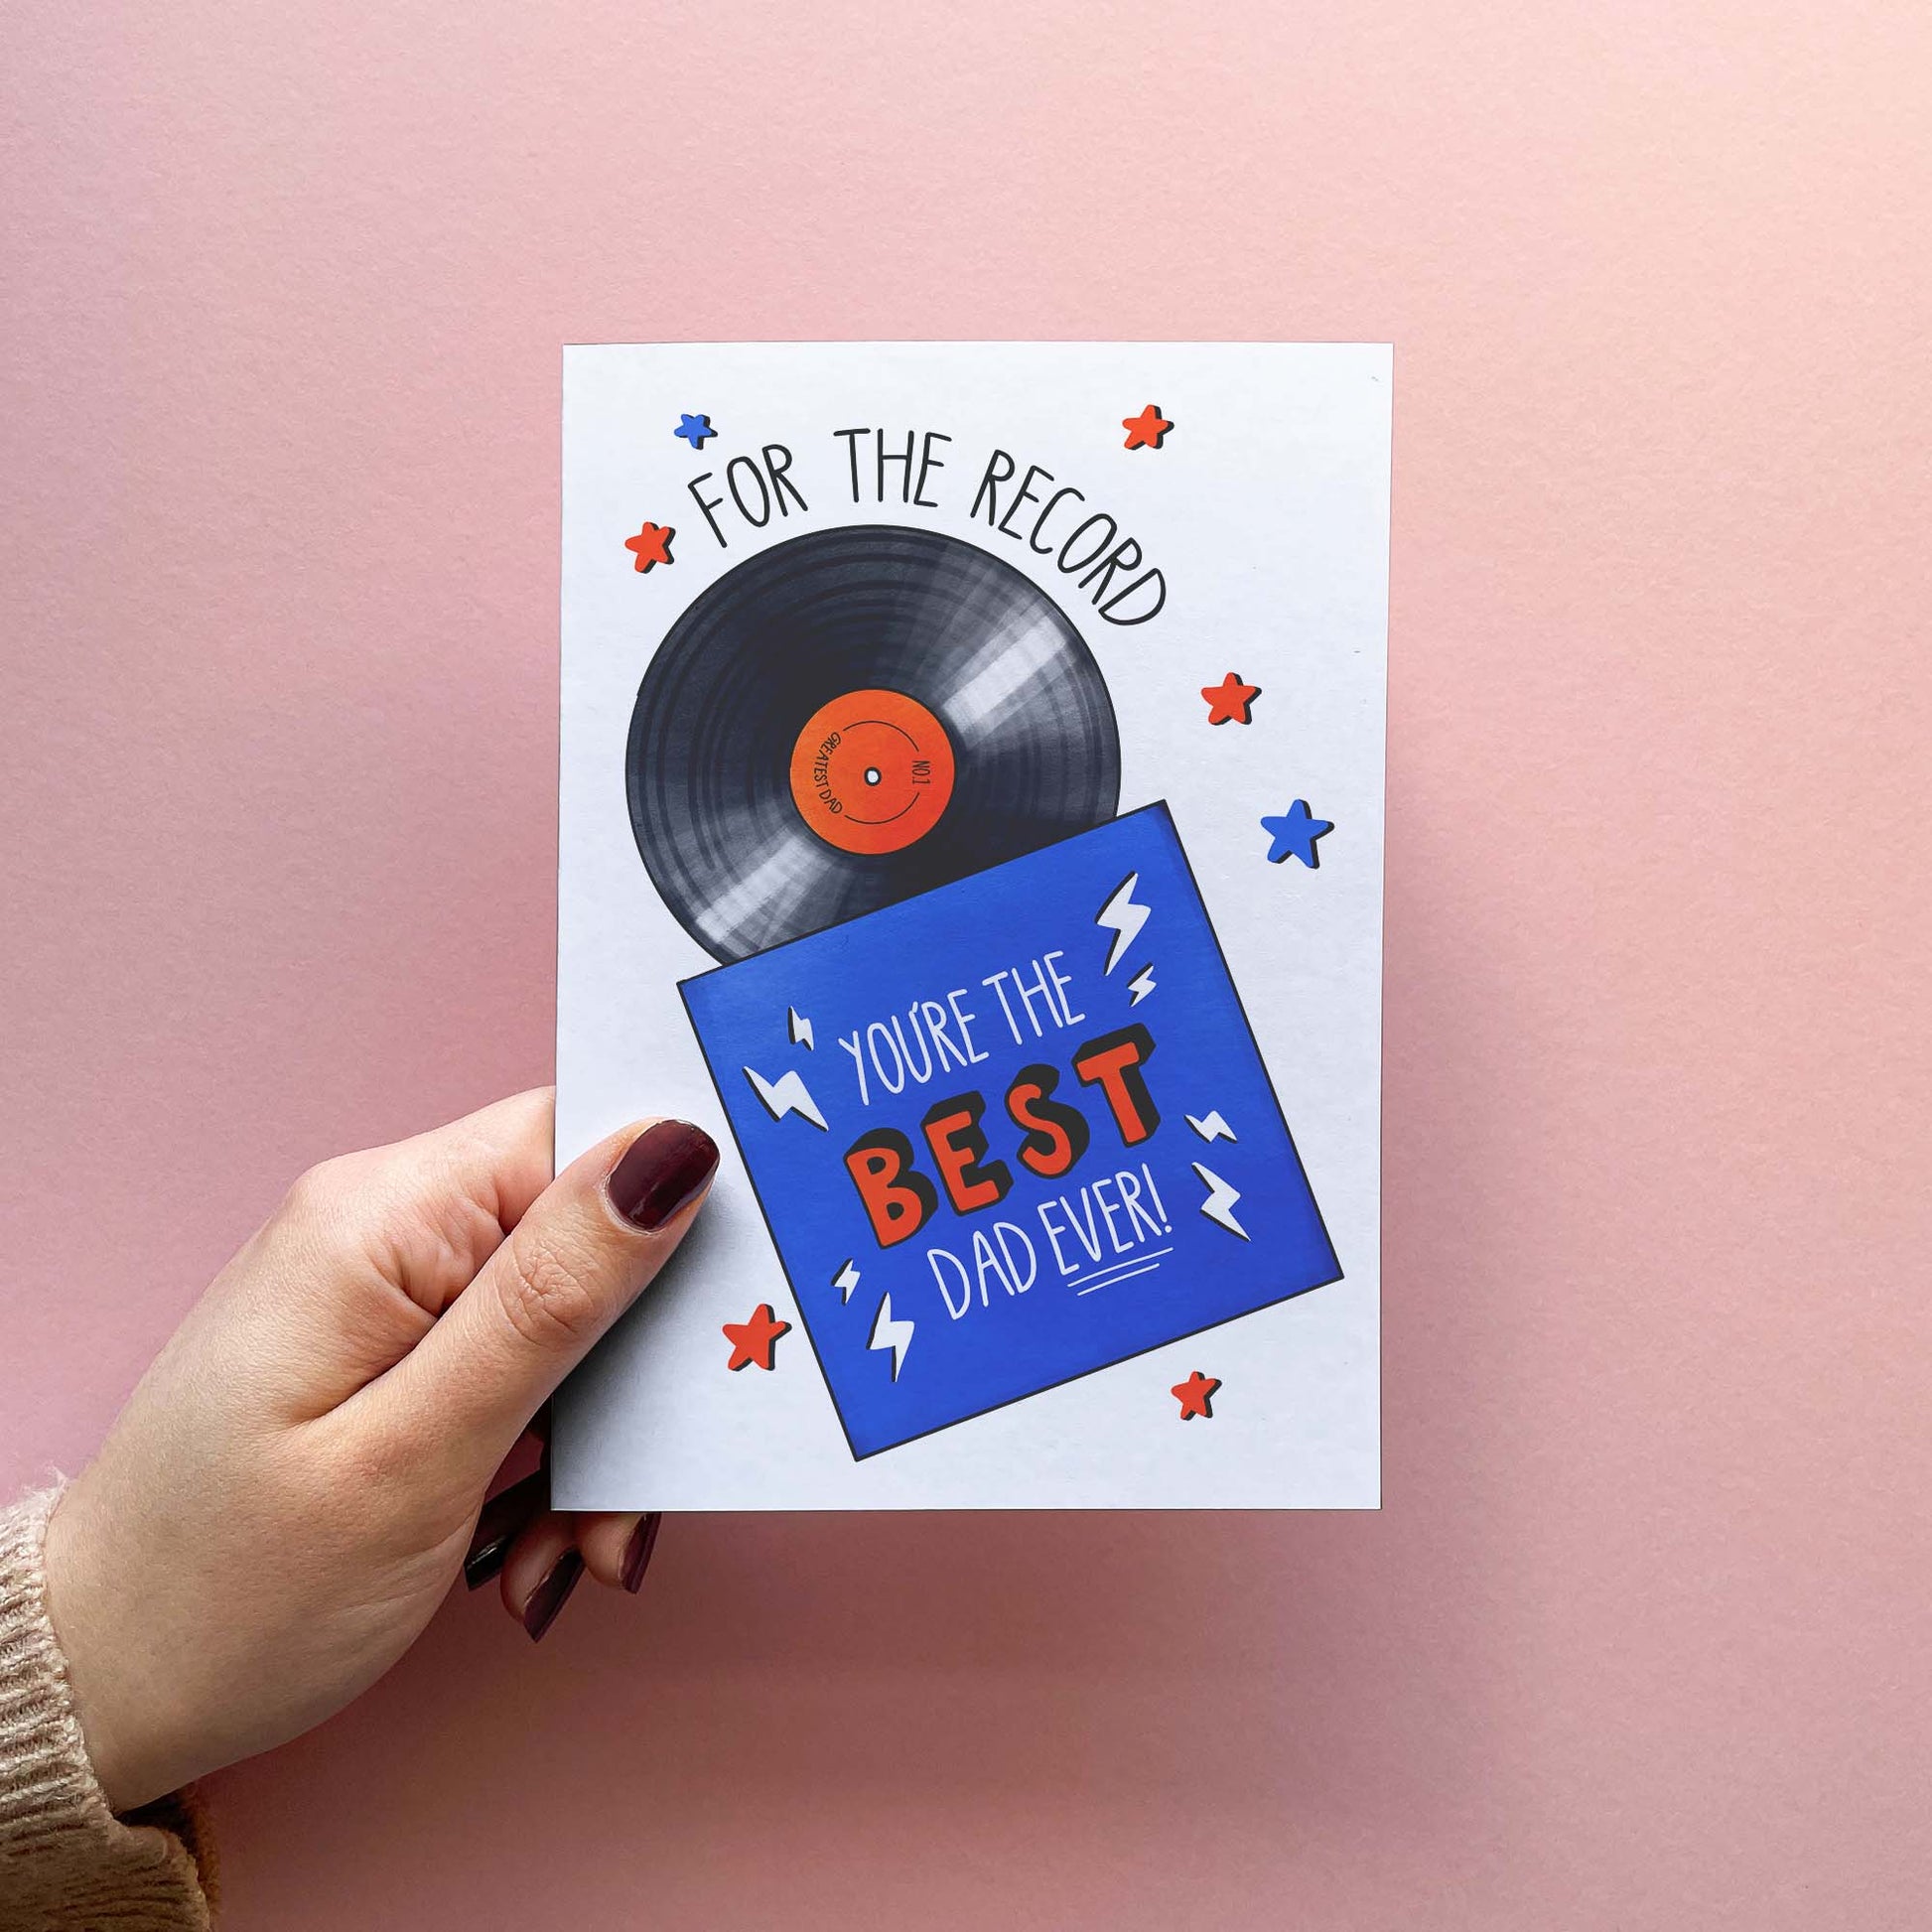 Whether it's a funny father's day card or happy birthday greetings to pair with your cool gift for Dad this card has you covered. Card reading 'for the record, you're the best dad ever!' Held in hand to show size.